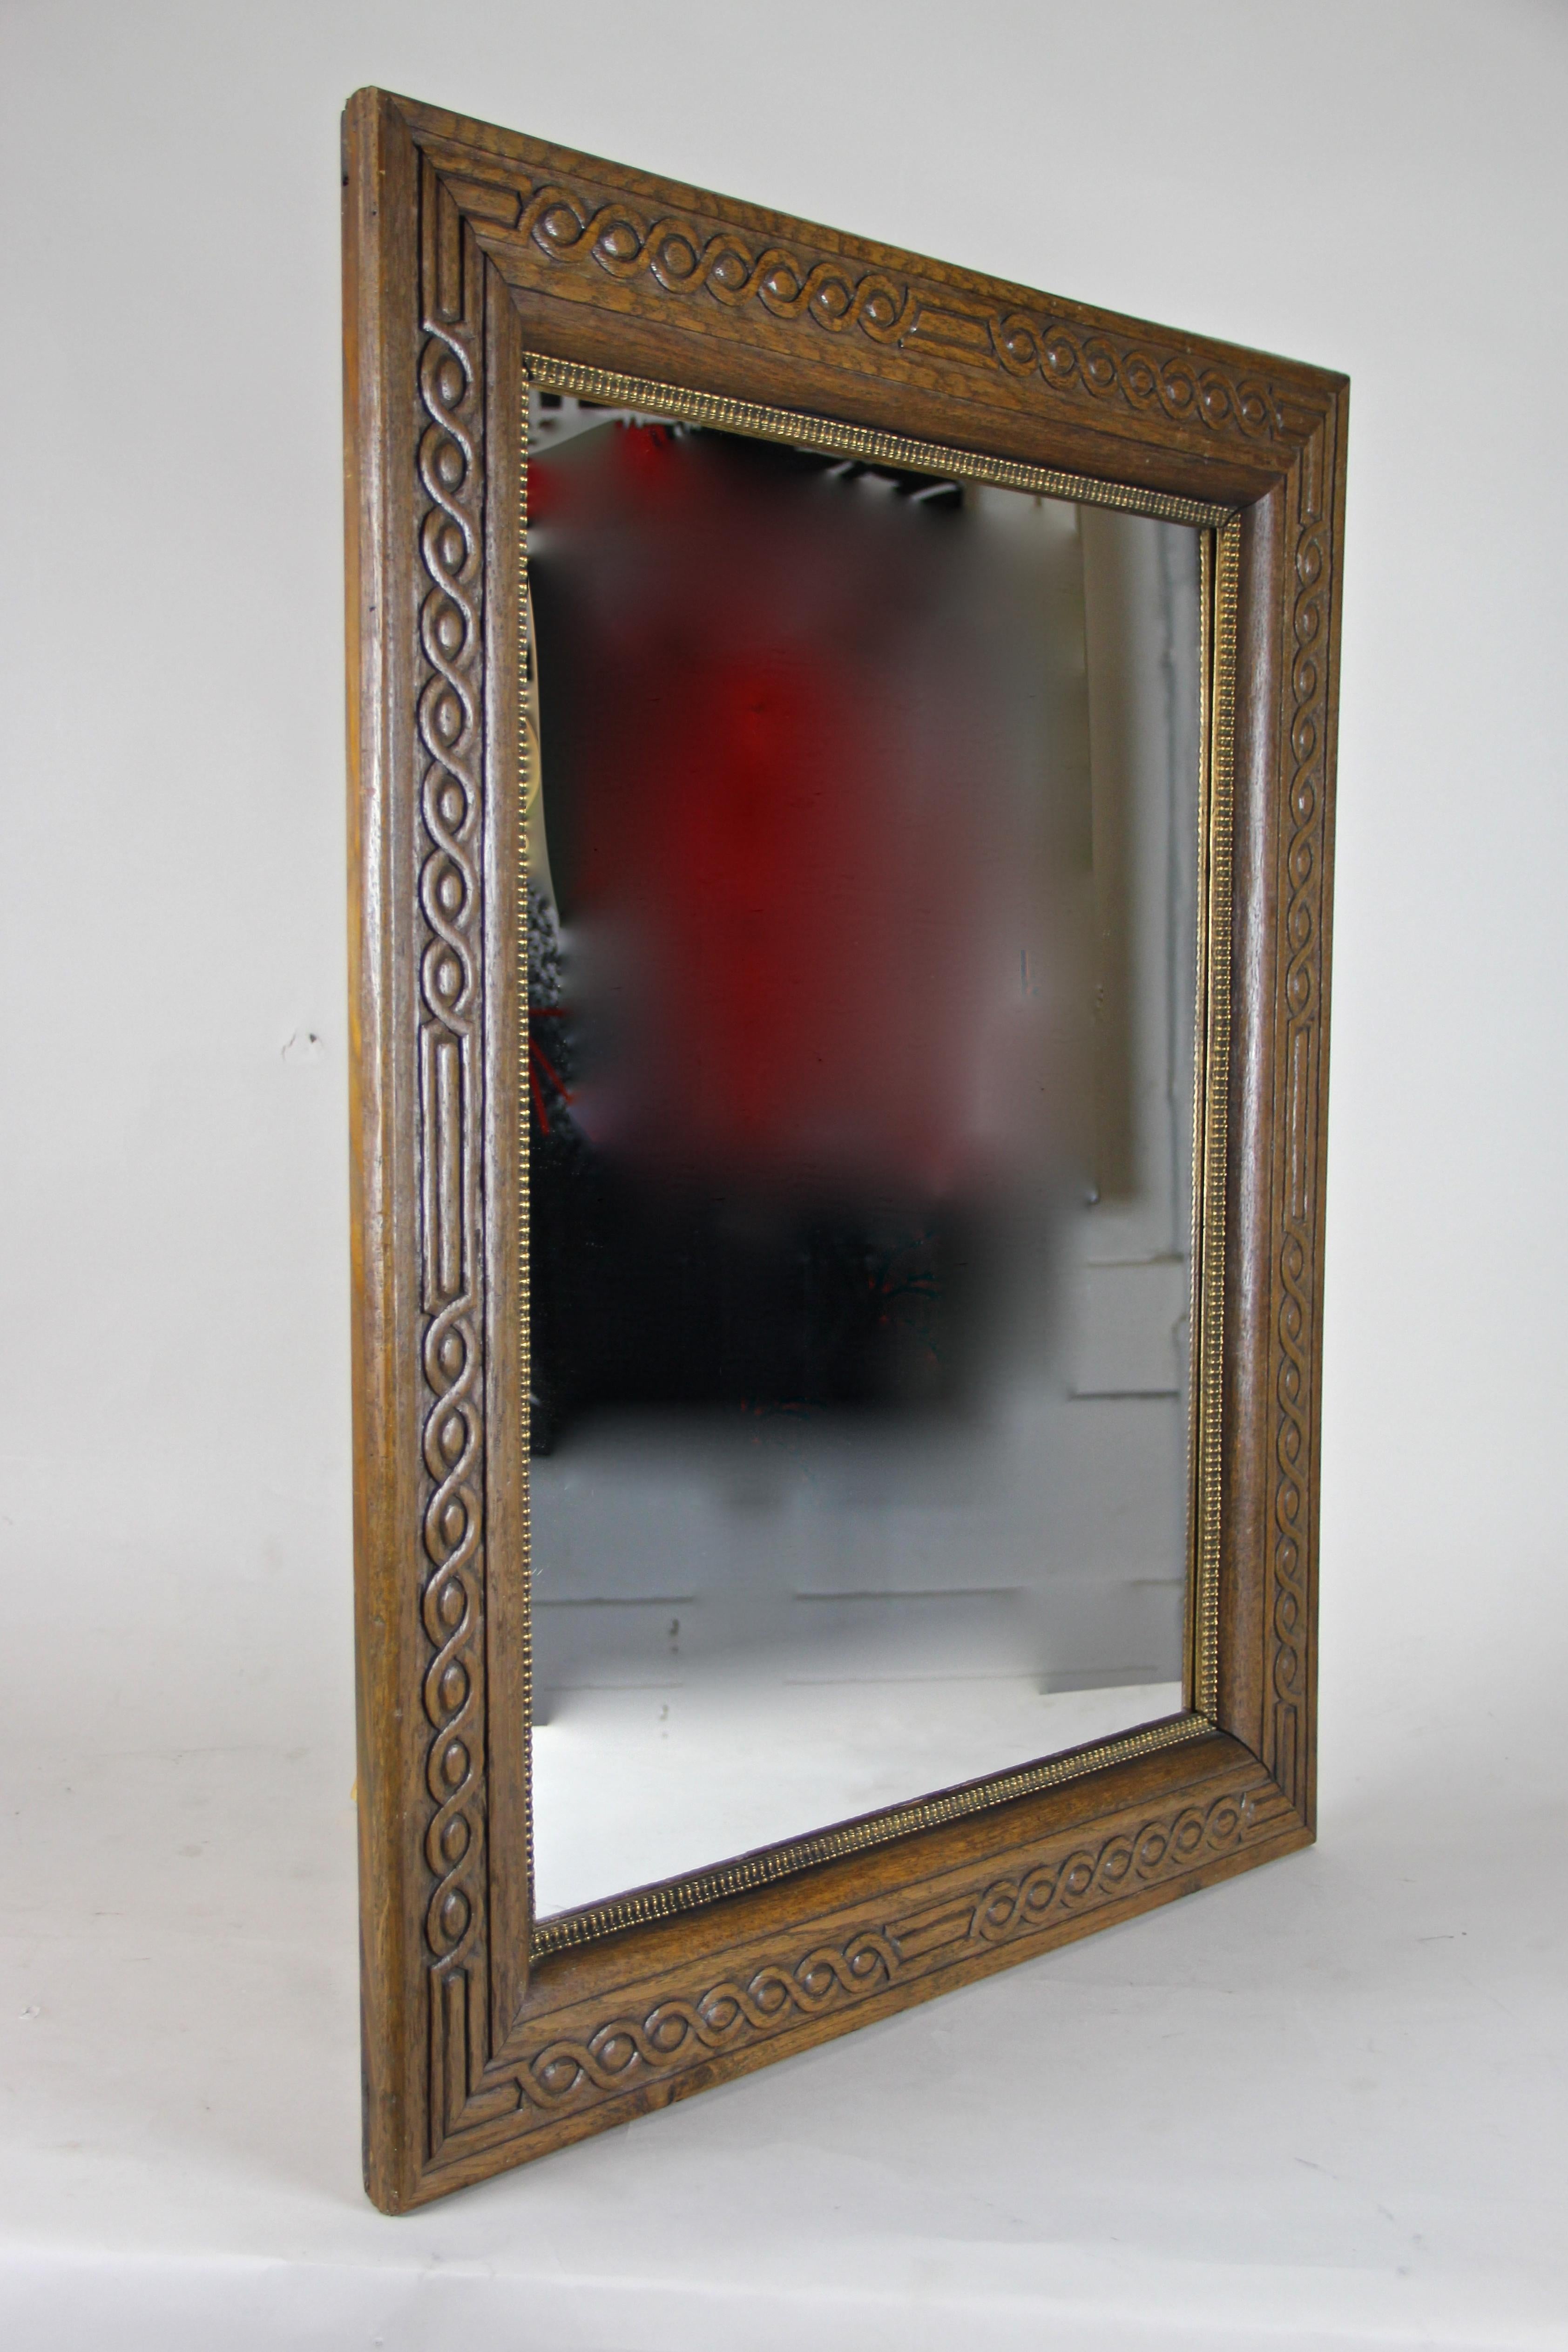 From the Historism period in an Austria circa 1890 comes this fantastic oakwood wall mirror. Made around the turn of the century this late 19th century wall mirror comes with a spruce wood overlapped inserted substructure and impresses with a nice